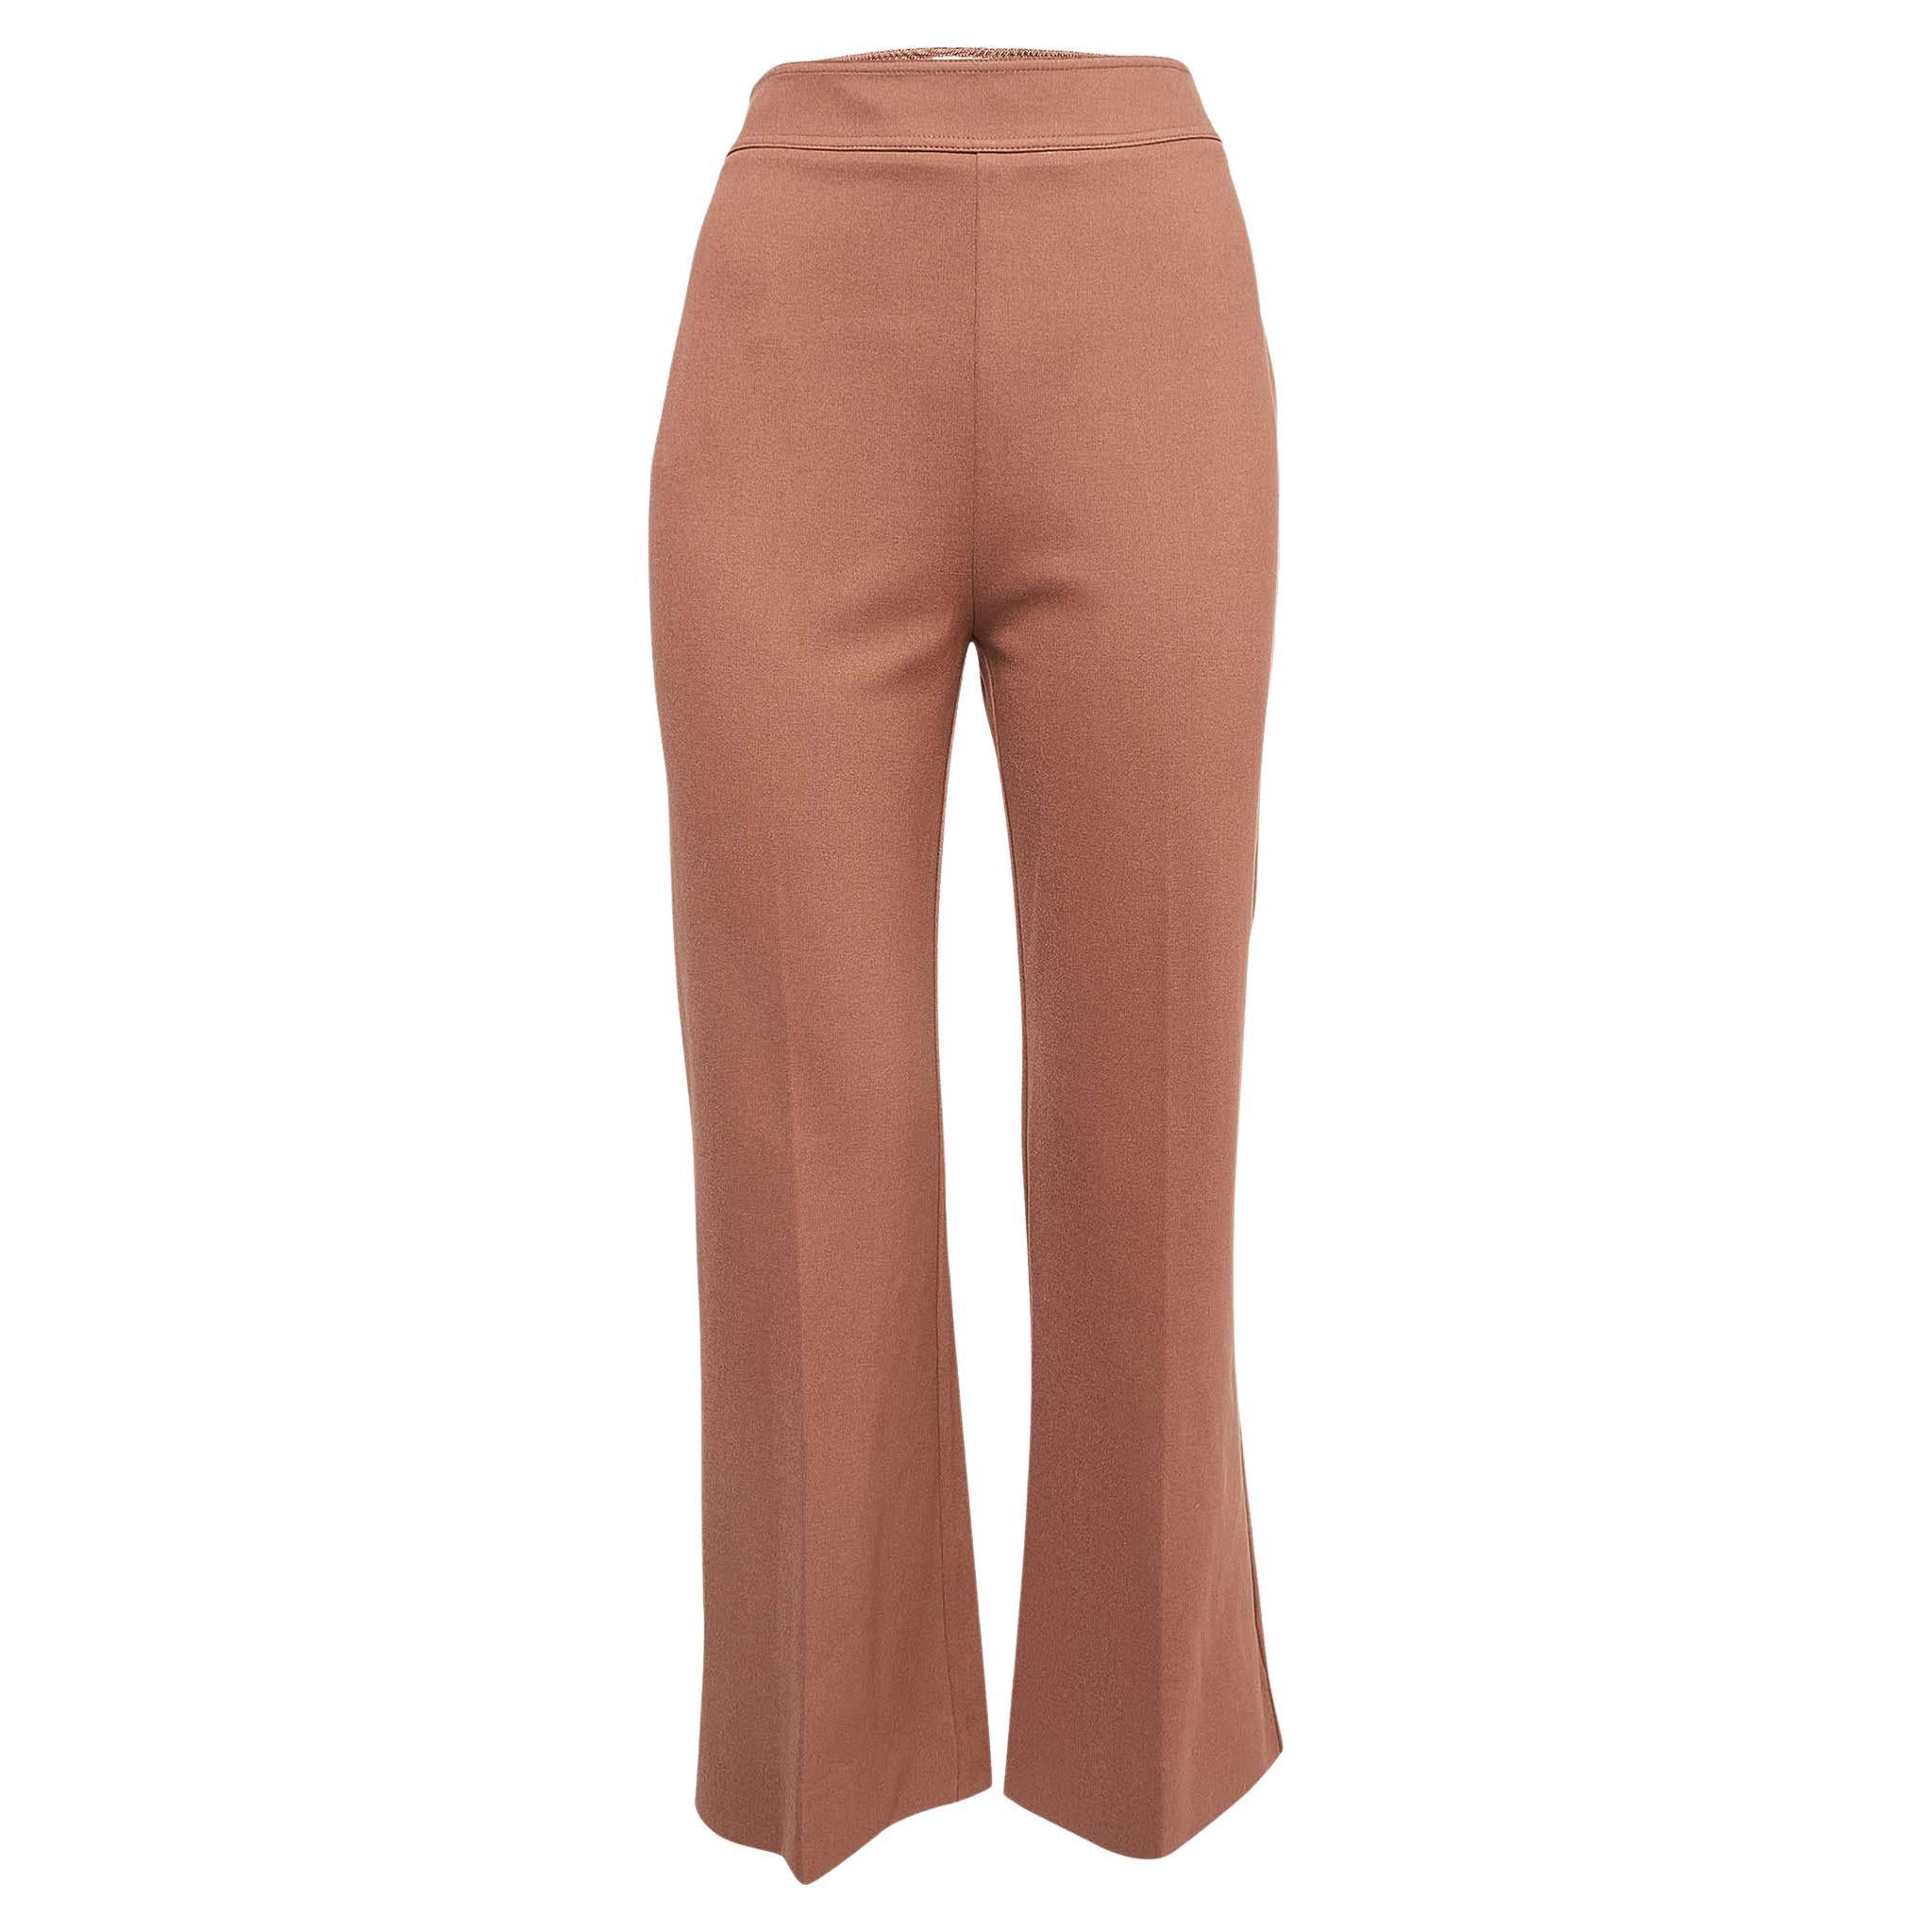 Victoria Victoria Beckham Brown Stretch Knit Flared Trousers M For Sale